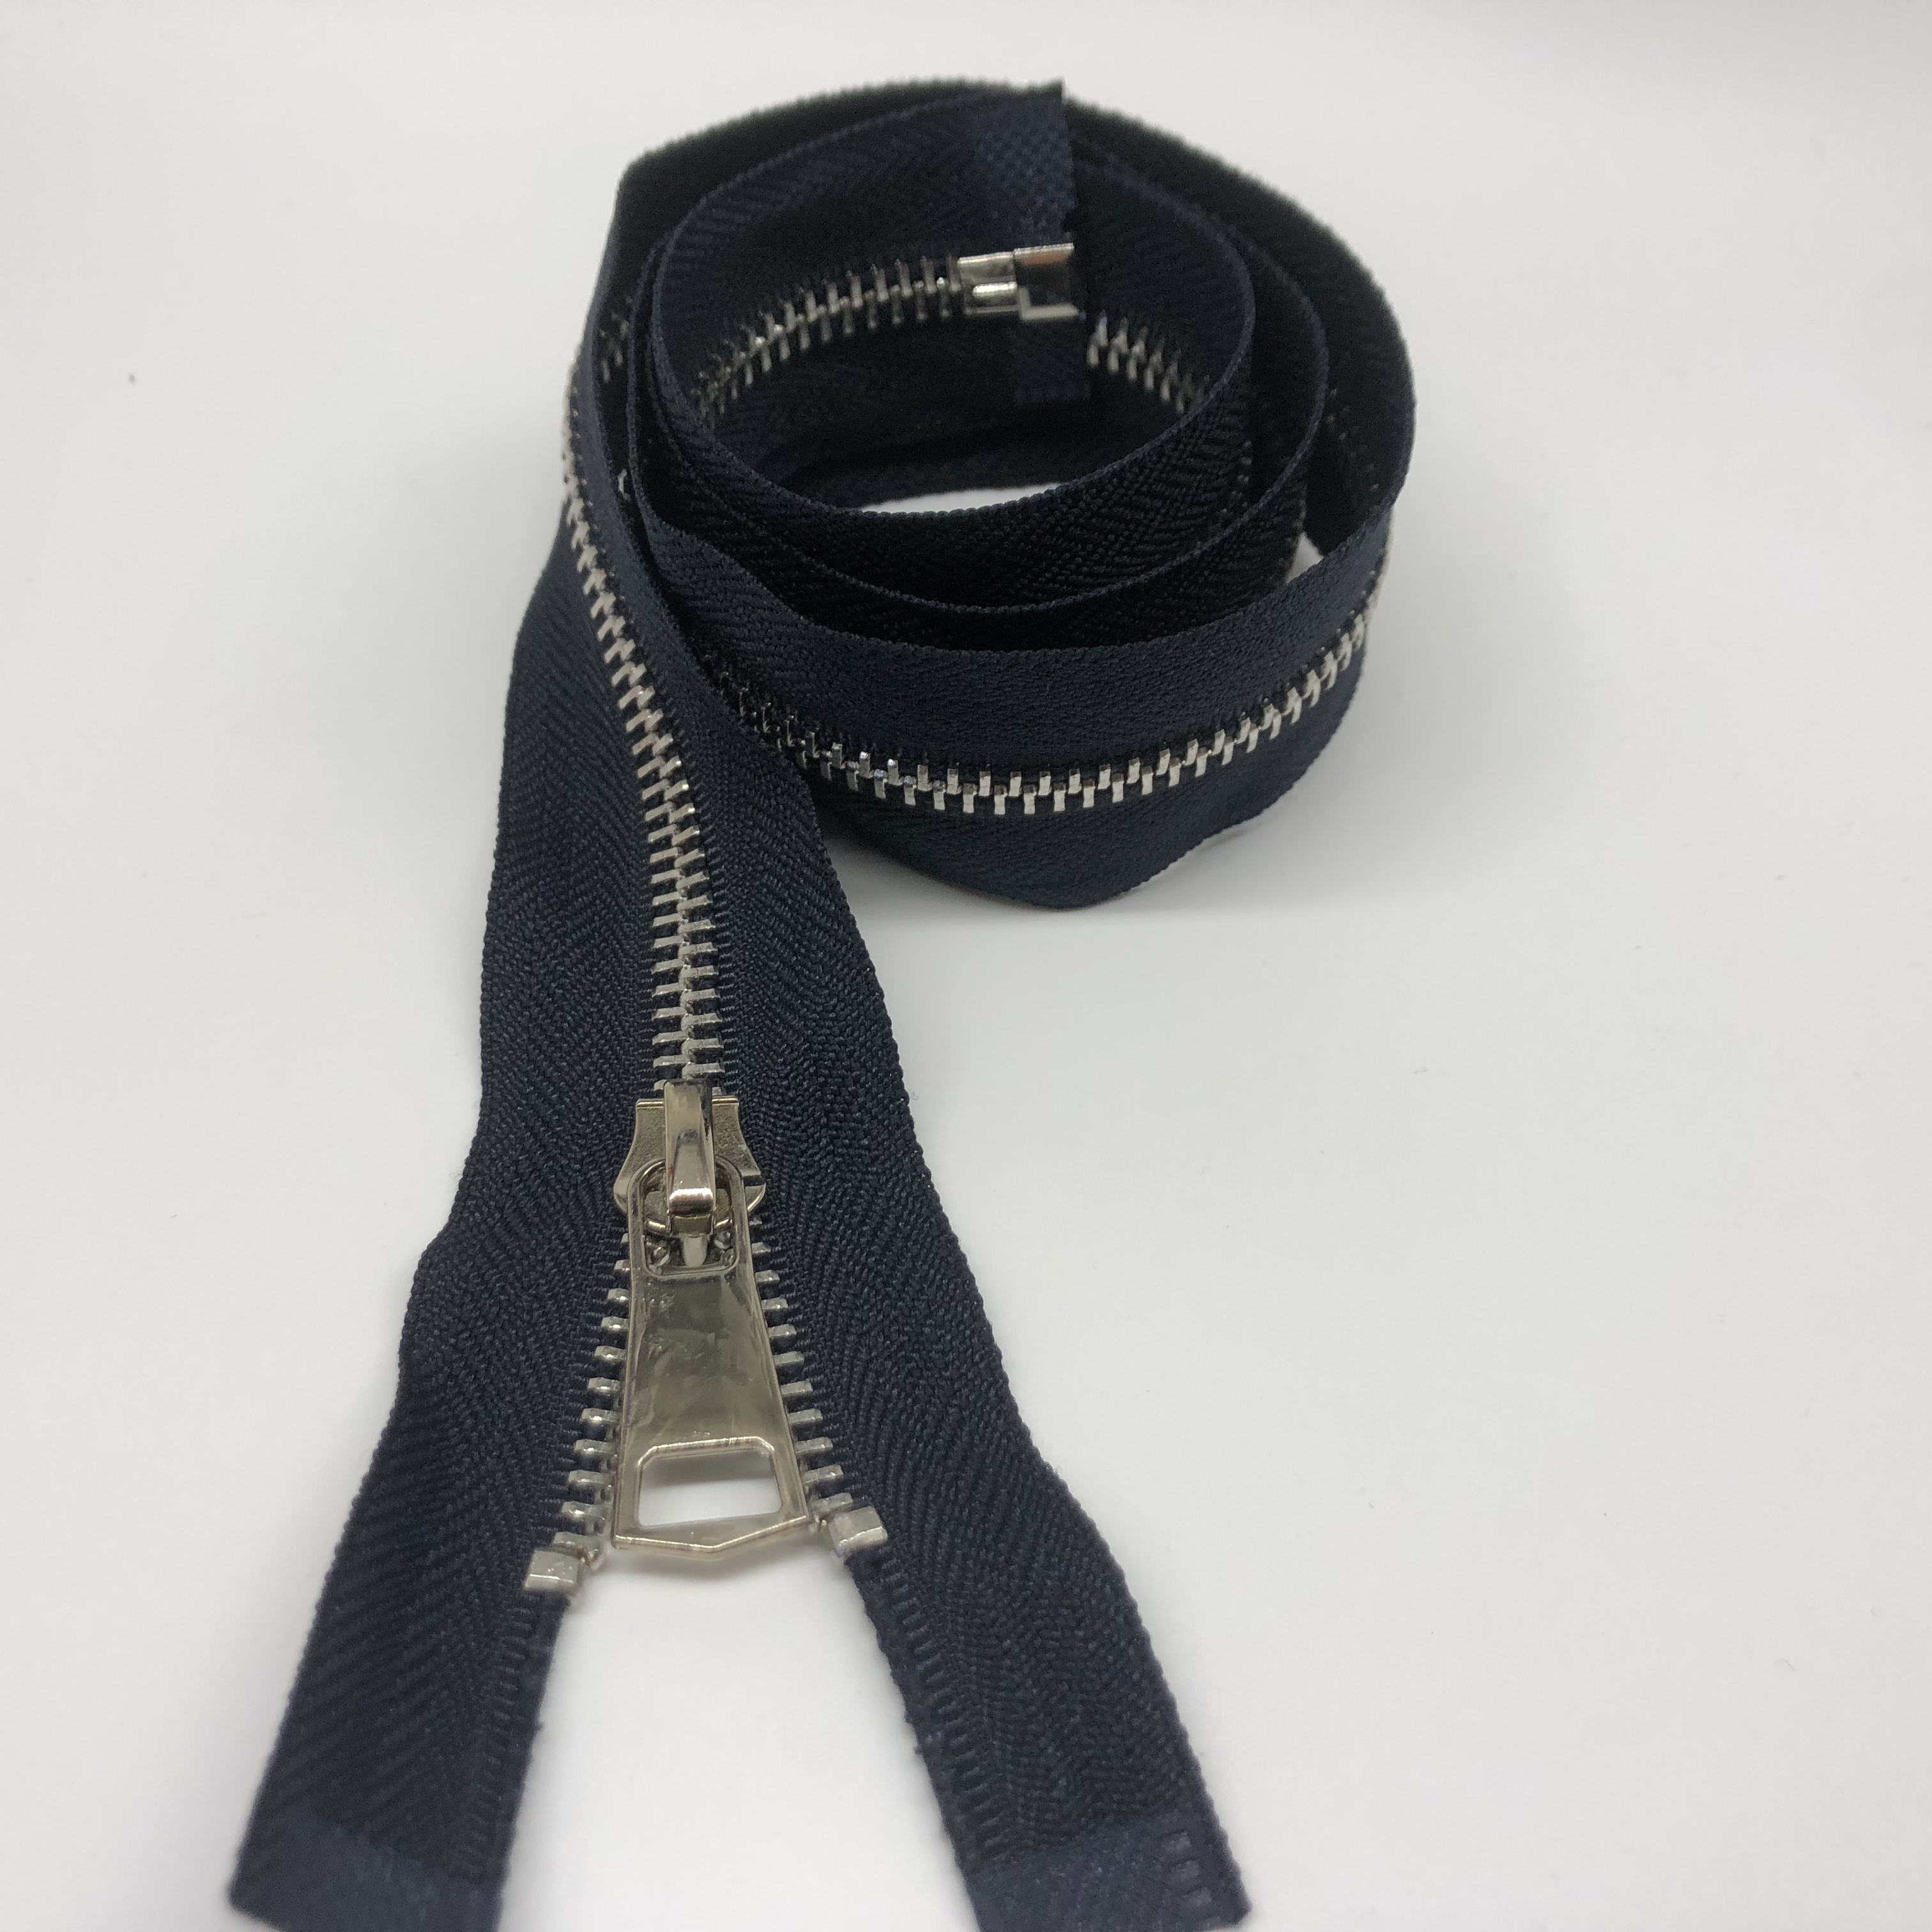 Two Way Navy Metal Separating Zipper With Silver Pull and Teeth